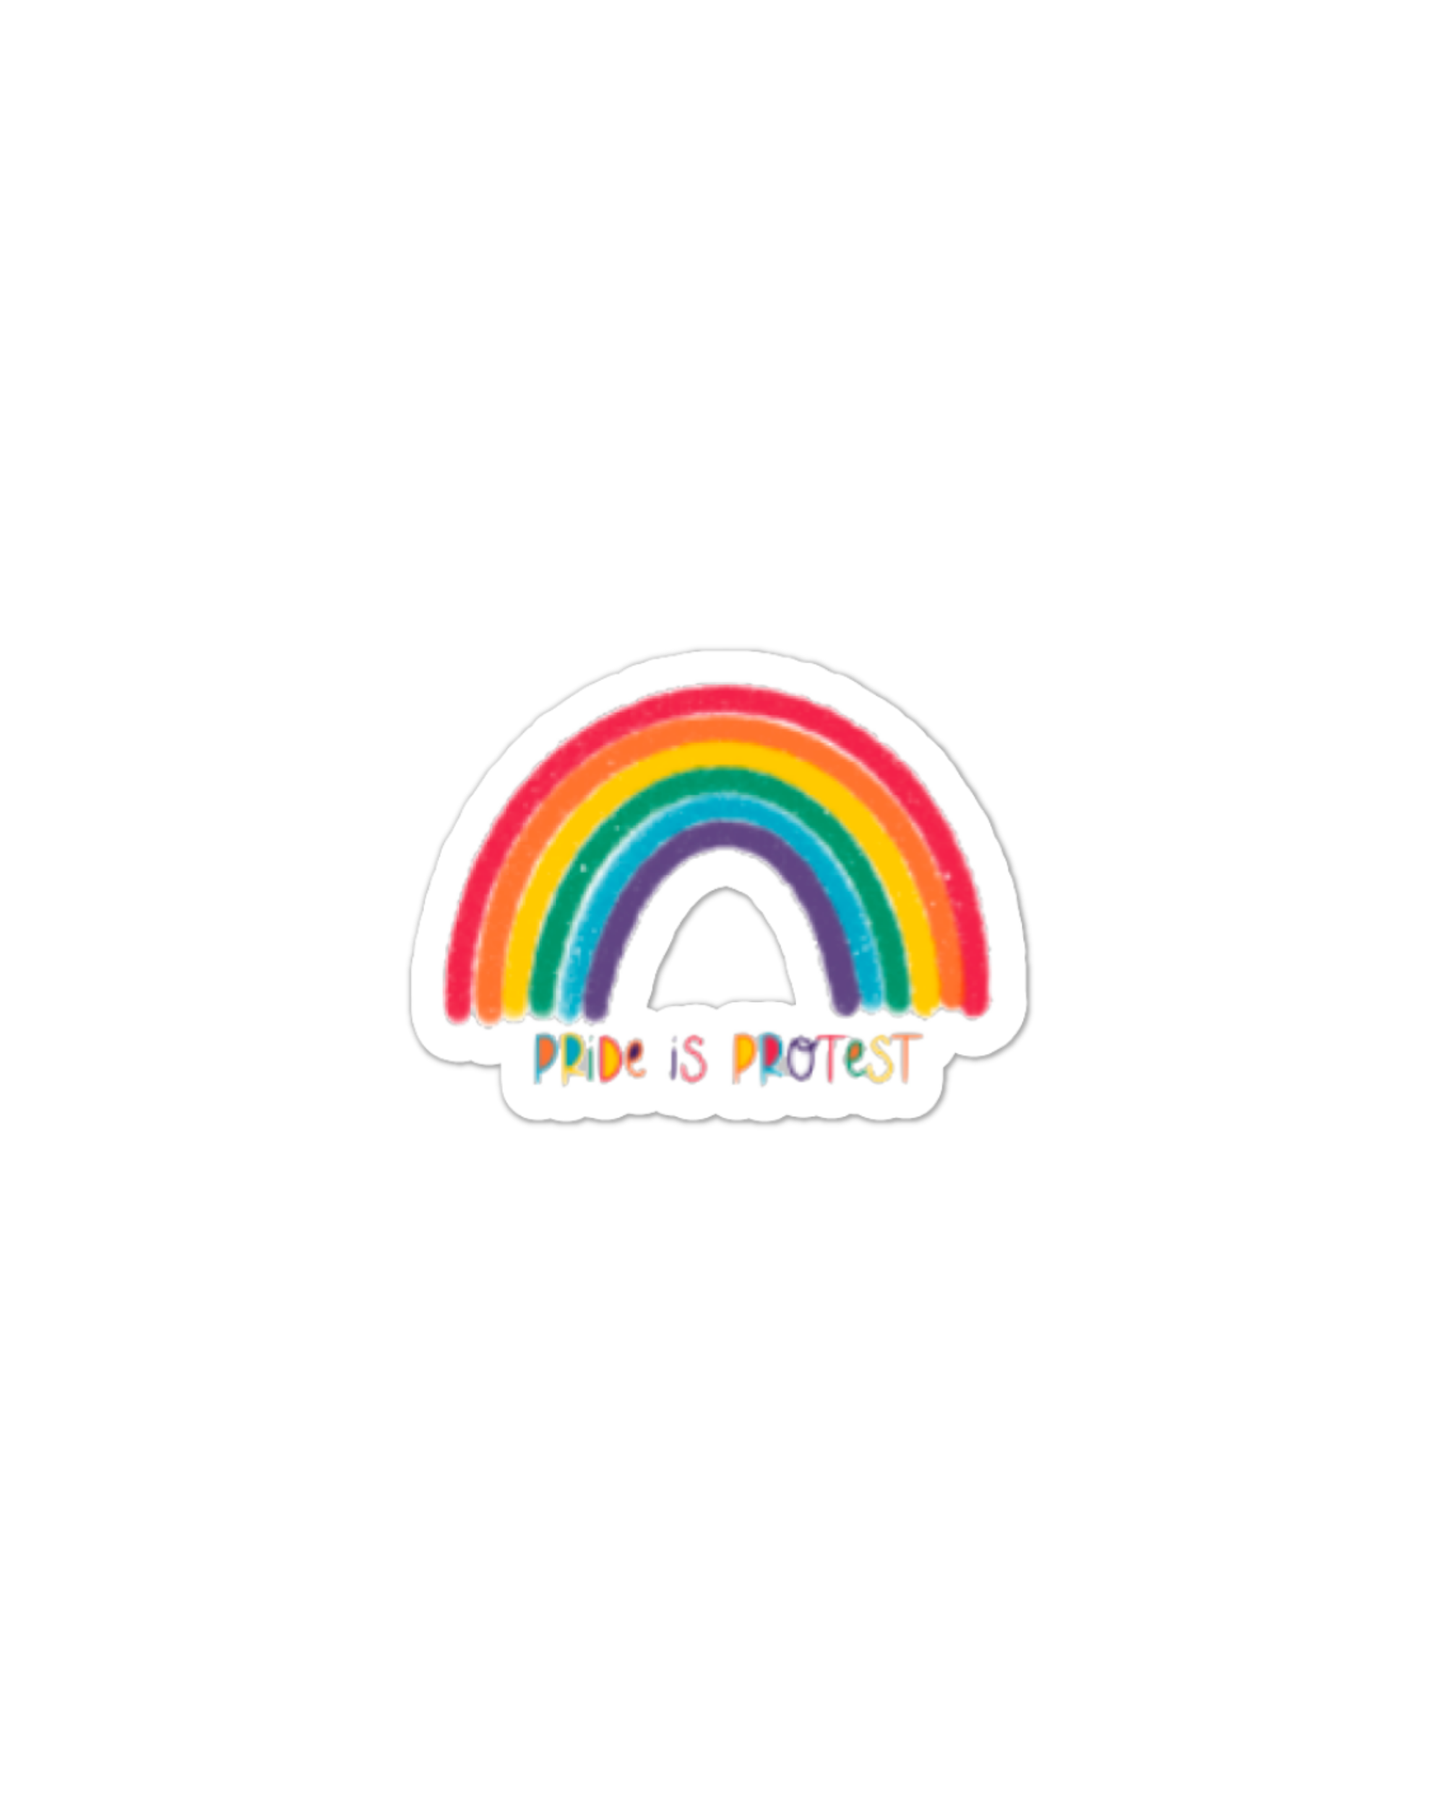 LGBTQ Pride Is Protest Vinyl Sticker Home Goods Fluffmallow   